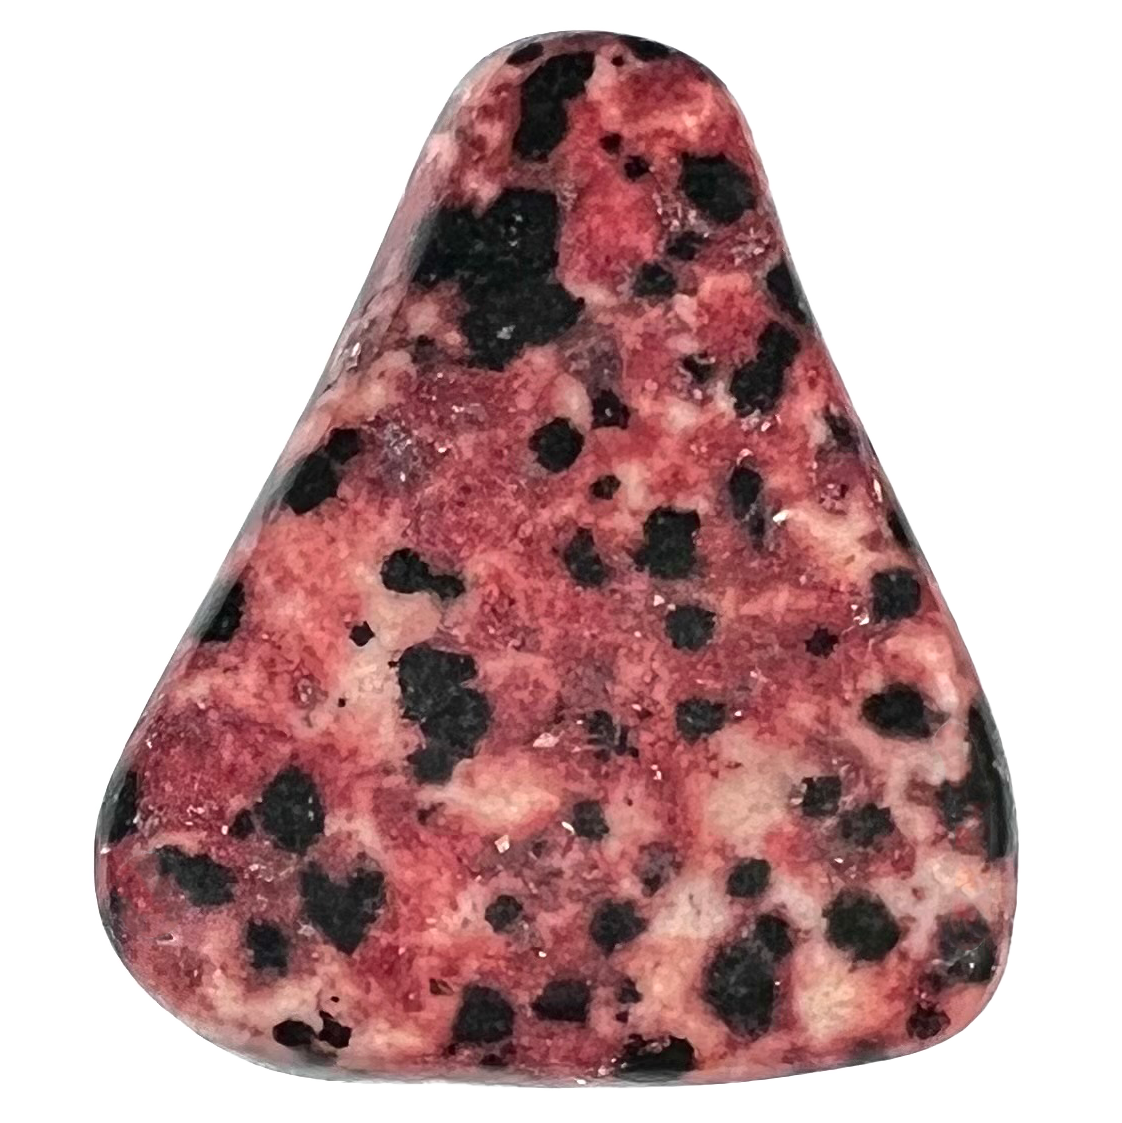 A tumble polished red dalmatian stone.  The stone is pink with black spots.